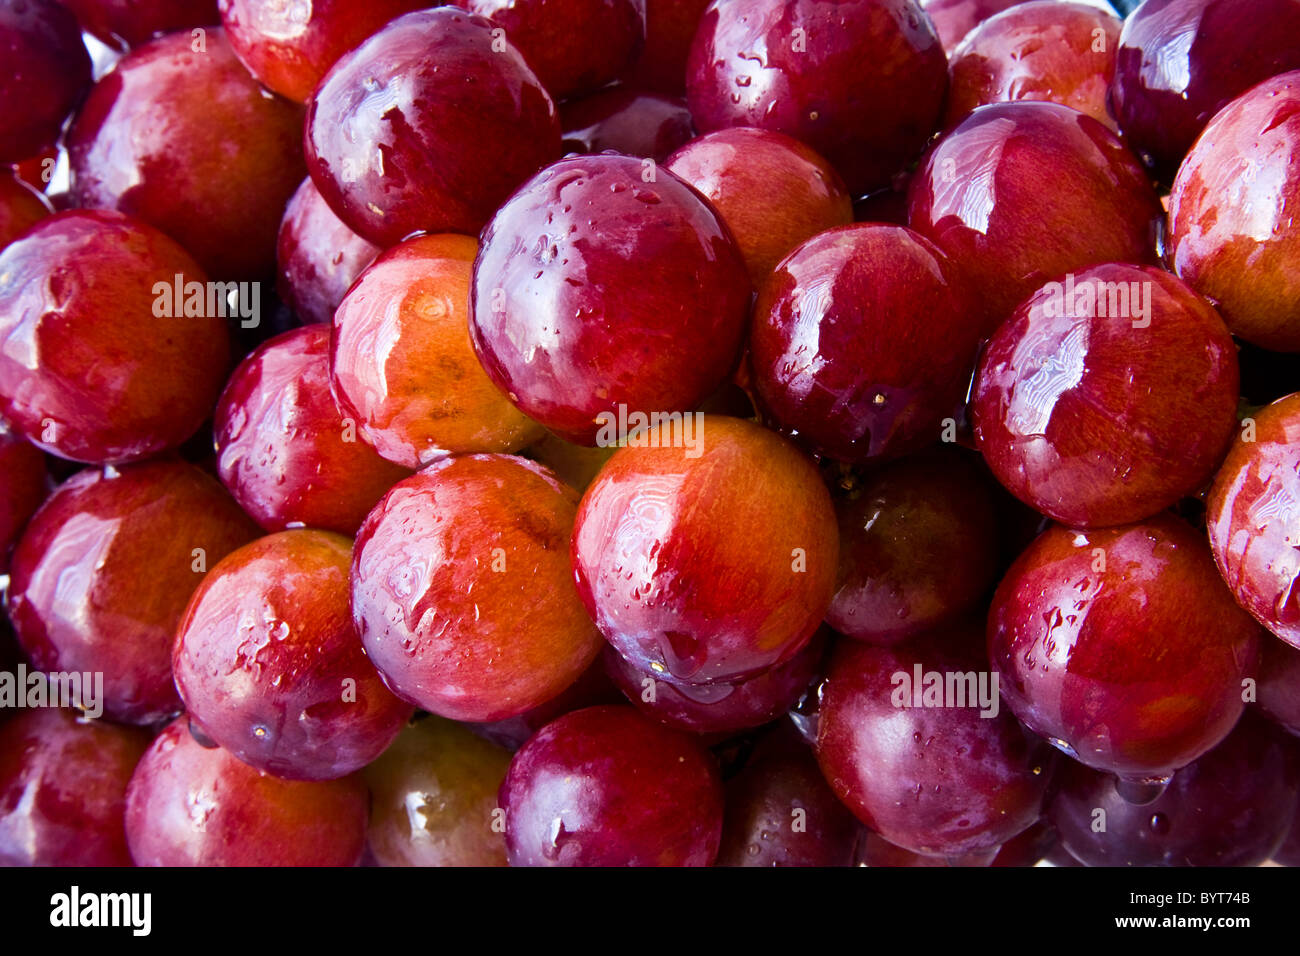 Background of red grapes with water droplets Stock Photo